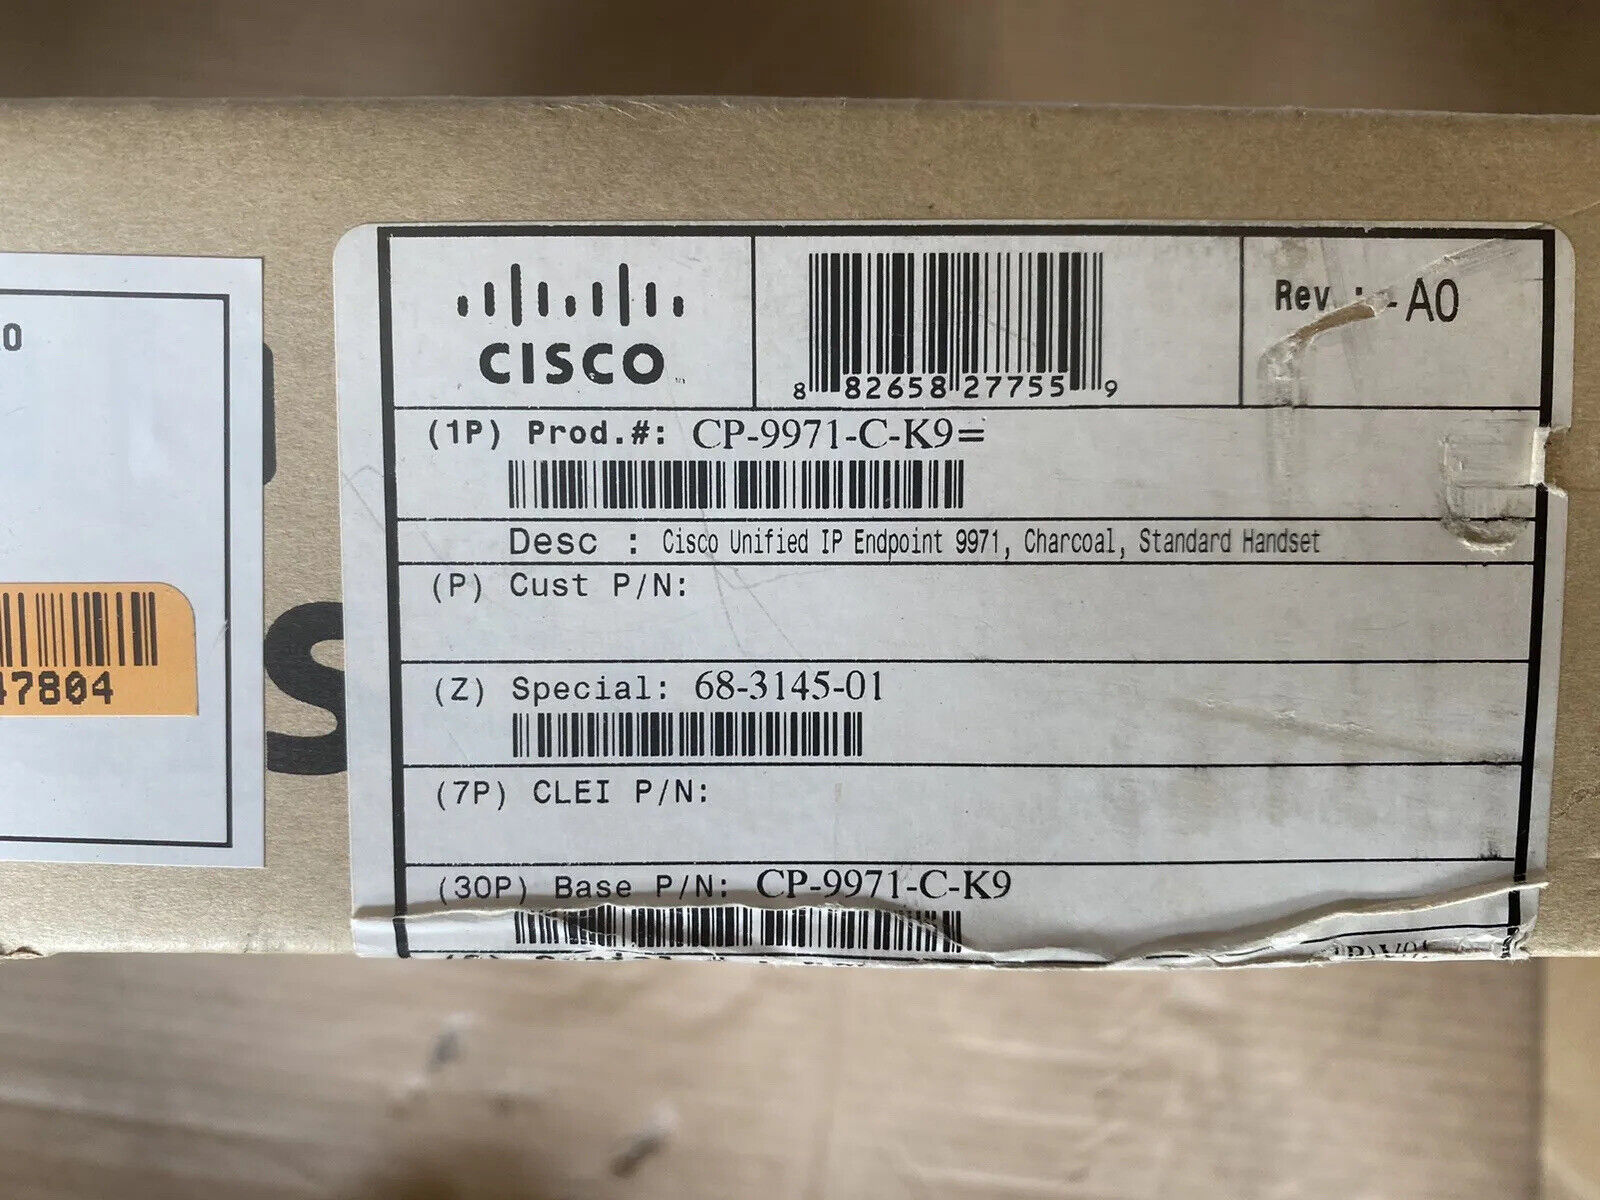 Cisco 9971 6-Line Unified IP Phone - Charcoal Gray (CP-9971-C-K9)